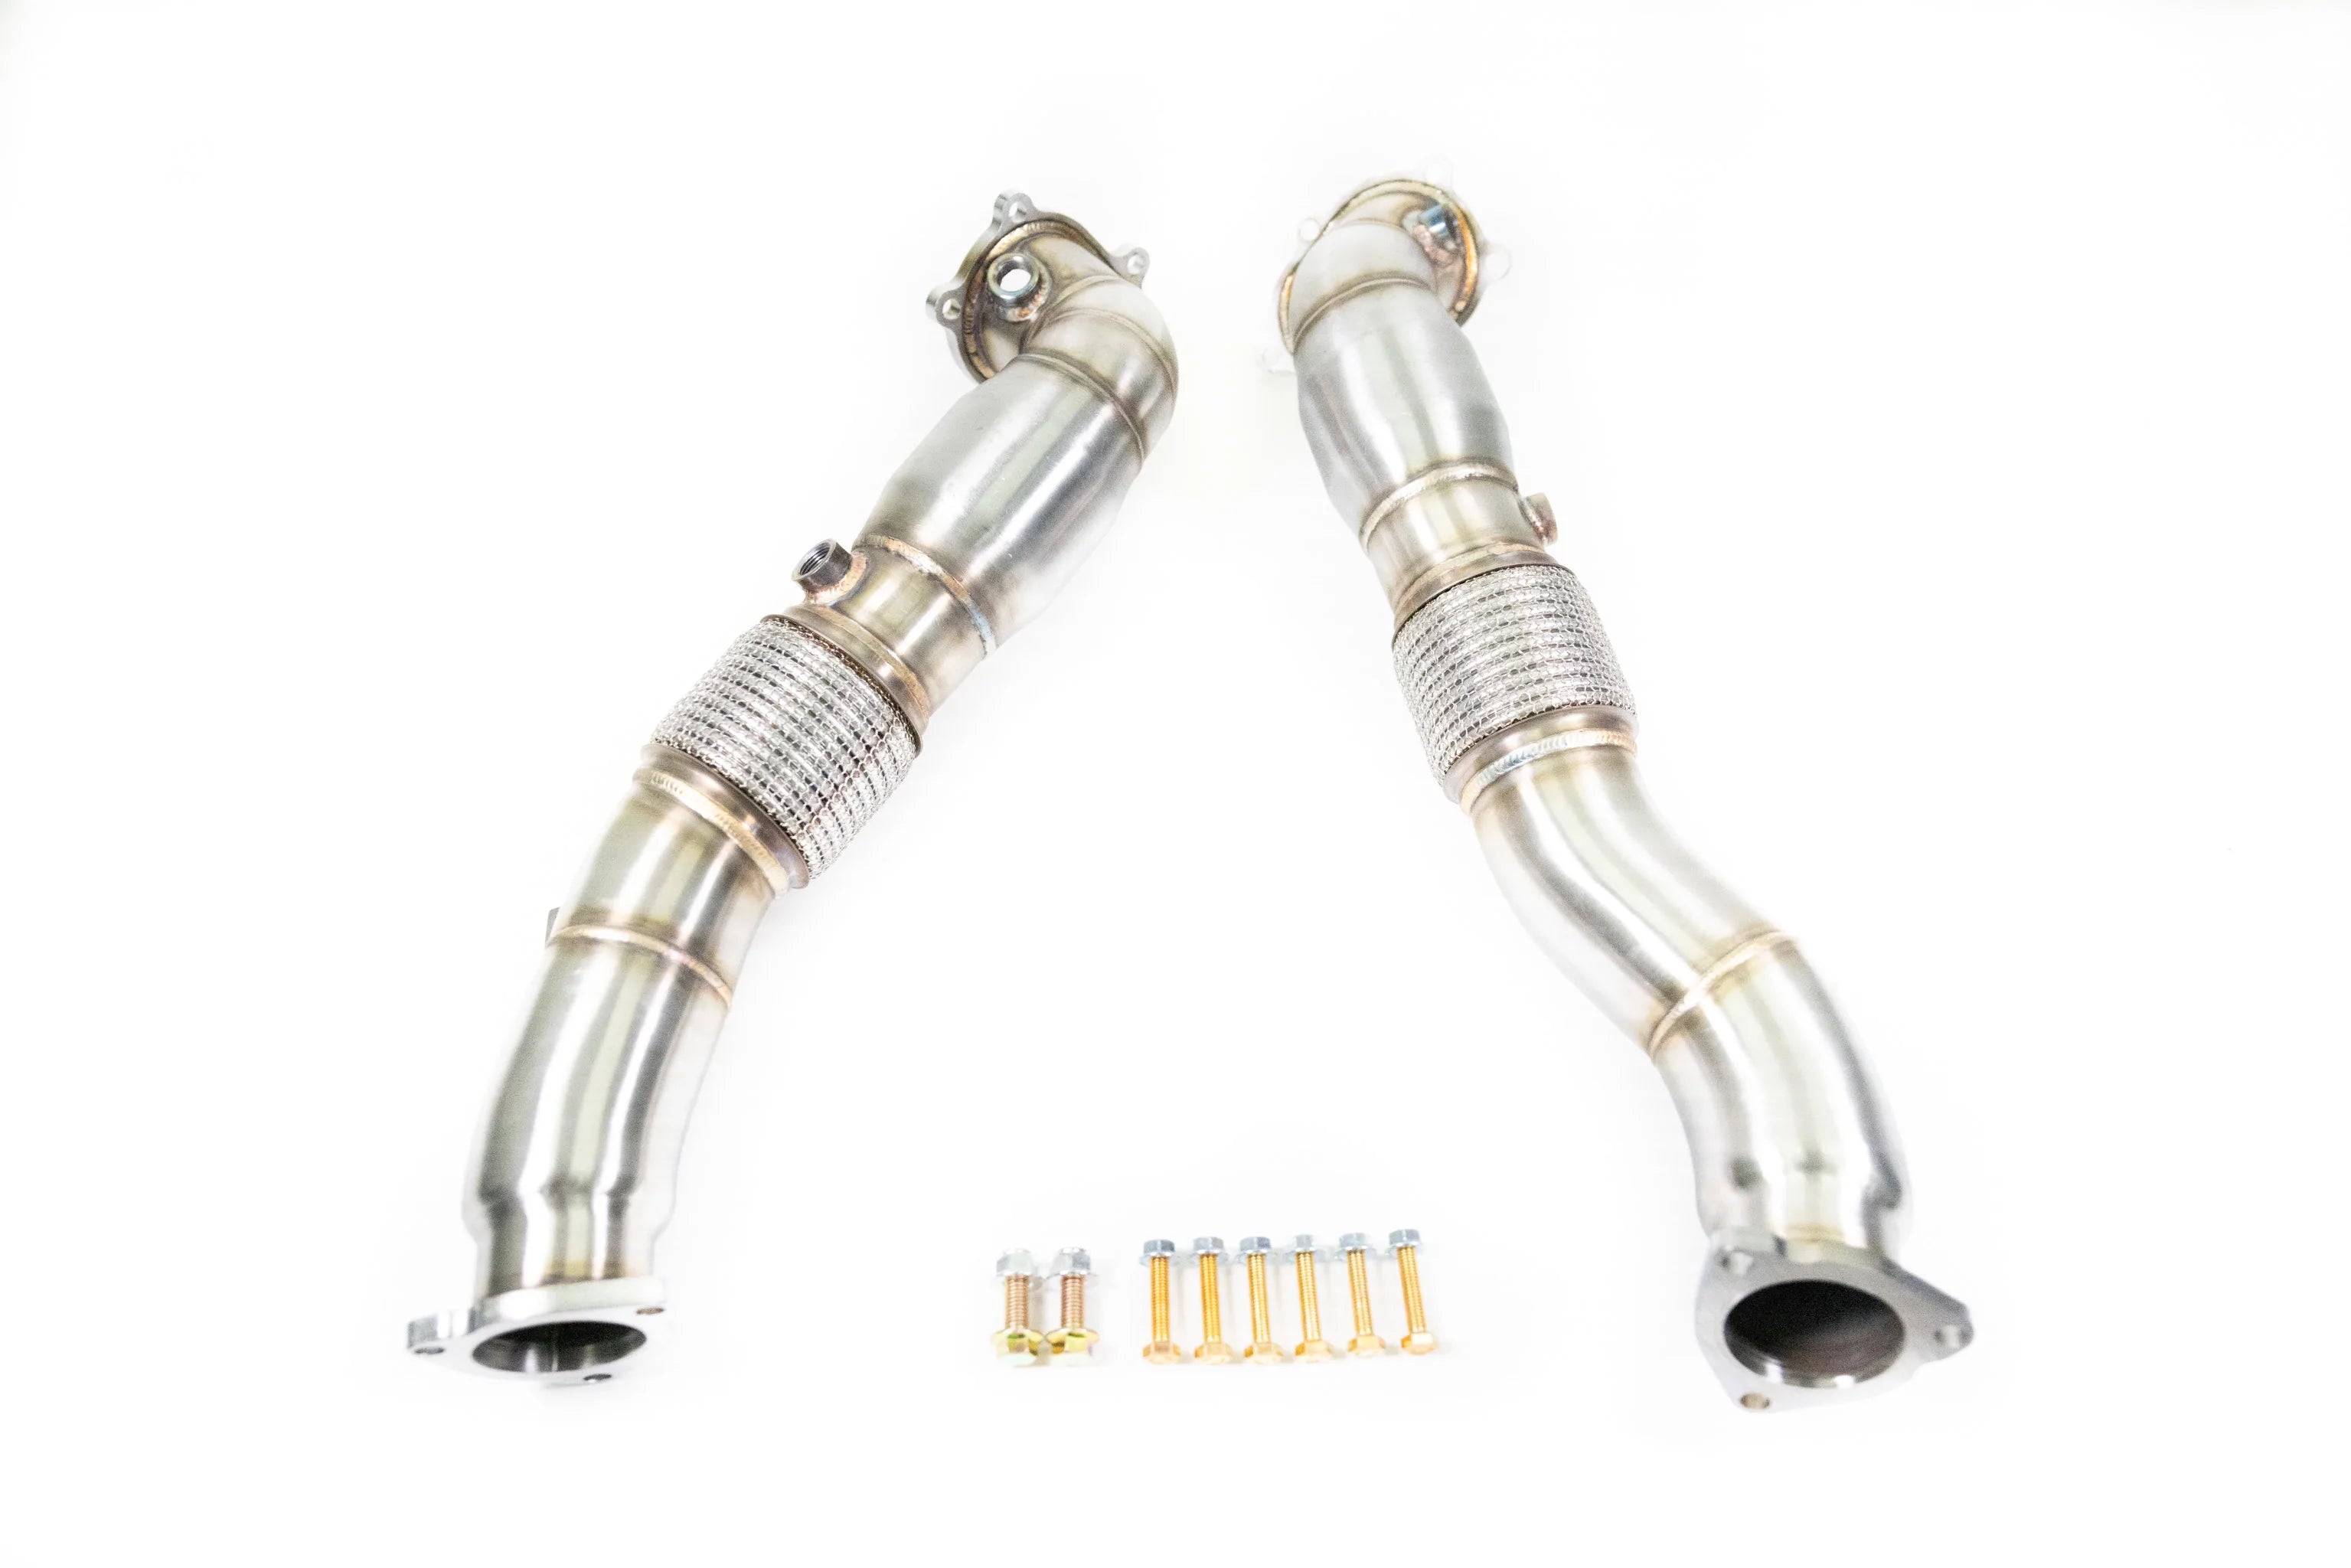 ARM Downpipes - Audi C7/C7.5 S6/S7/RS7 and D4 S8 4.0T